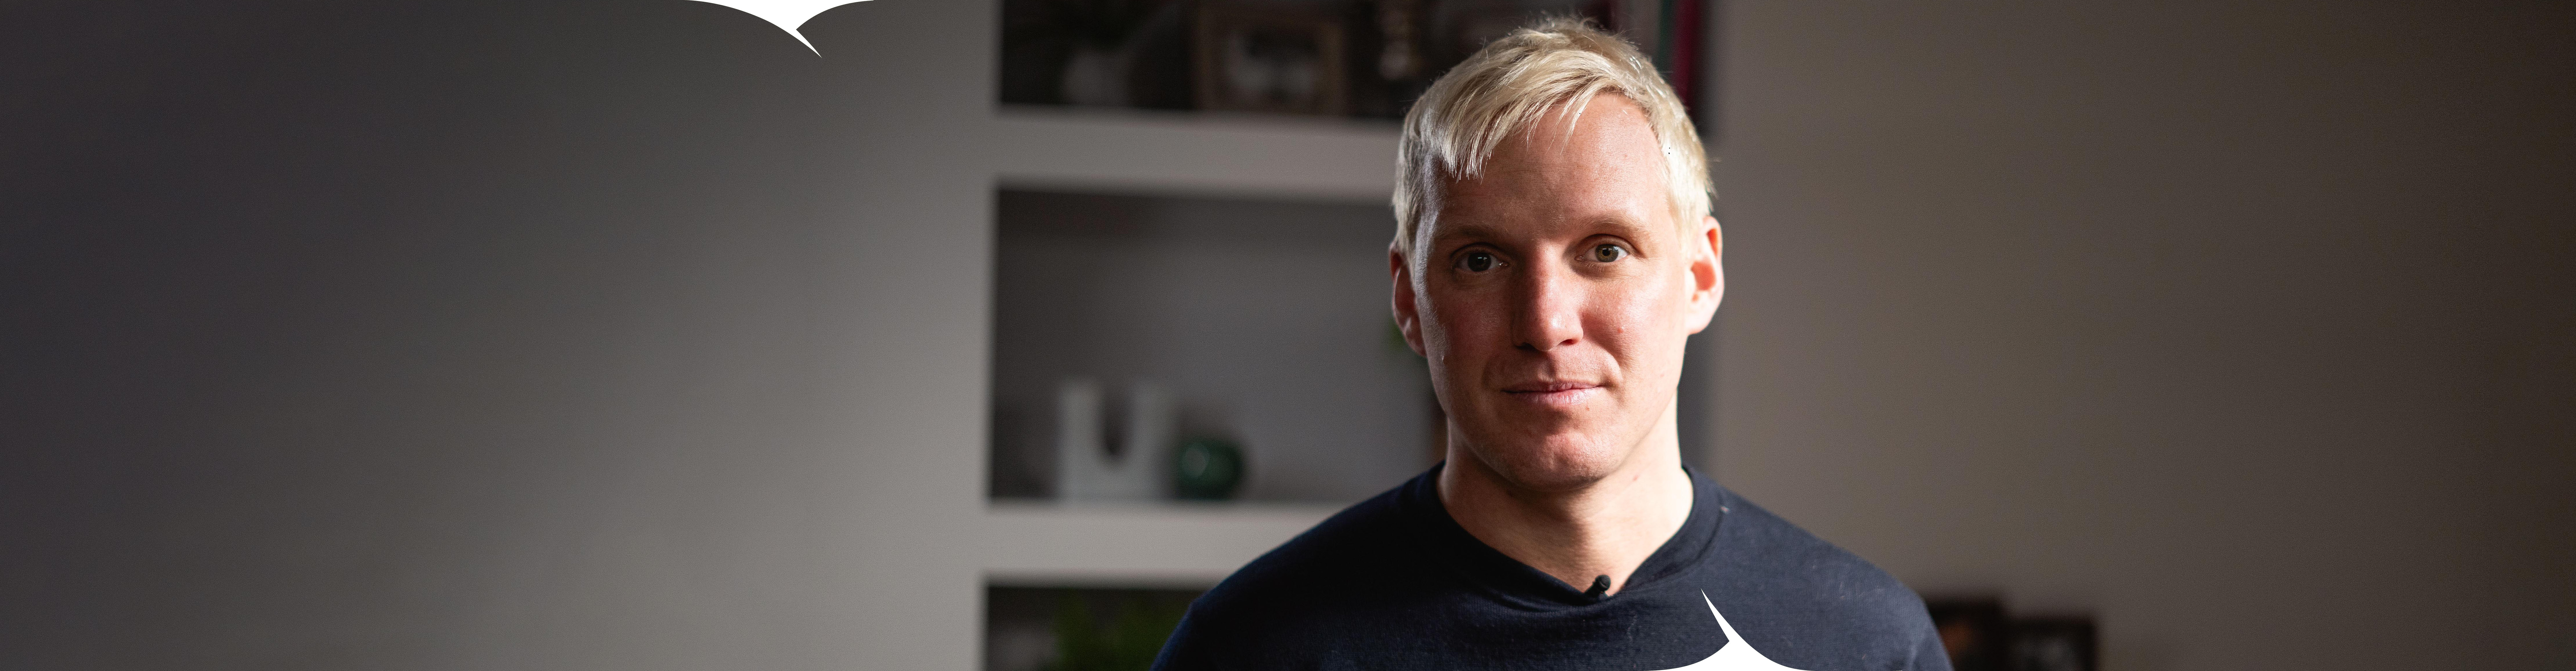 TV personality Jamie Laing. A man with blond hair looks at the camera, standing in his living room. 